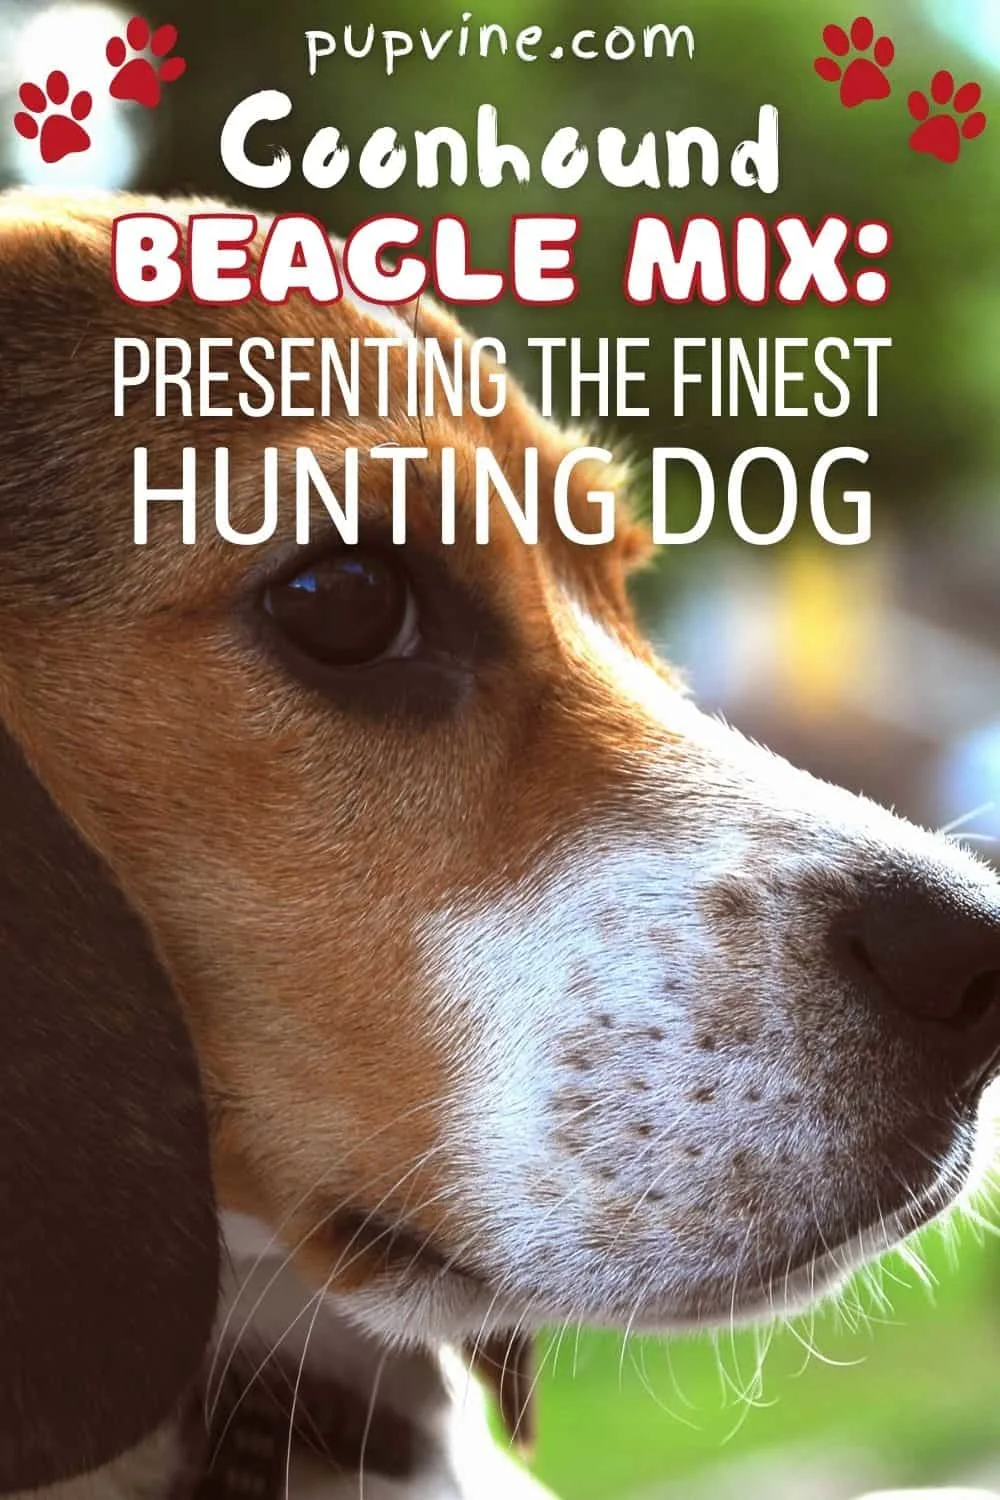 Coonhound Beagle Mix: Presenting The Finest Hunting Dog